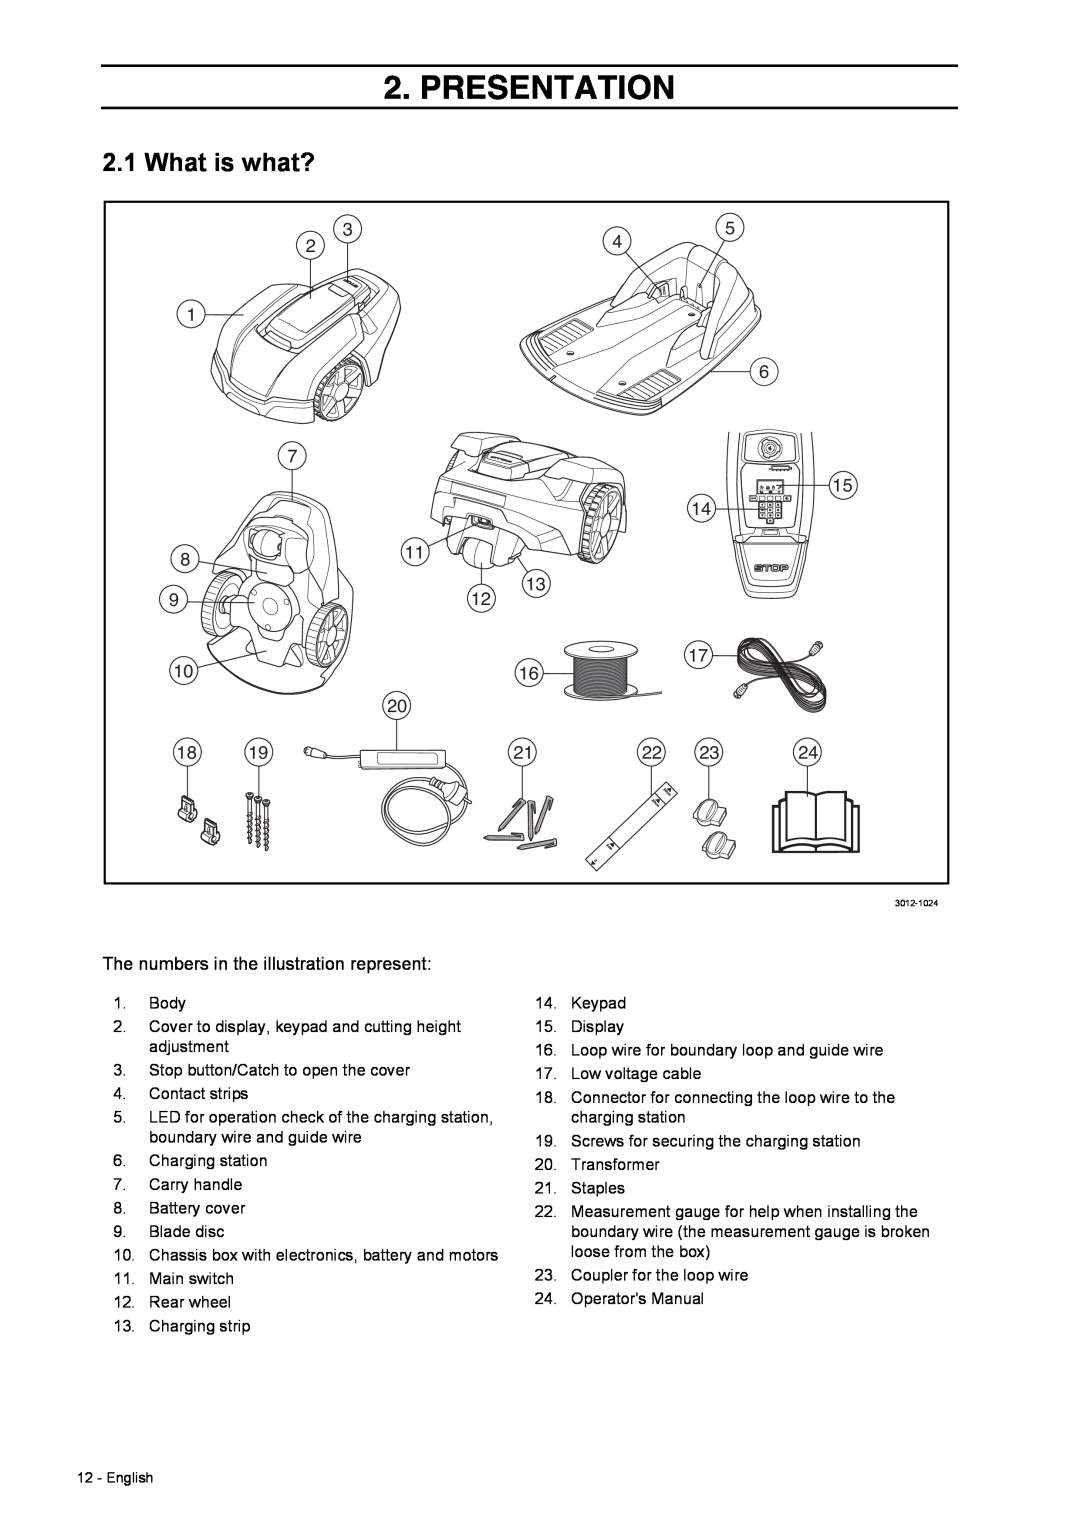 Husqvarna 308 manual What is what?, Presentation, The numbers in the illustration represent 